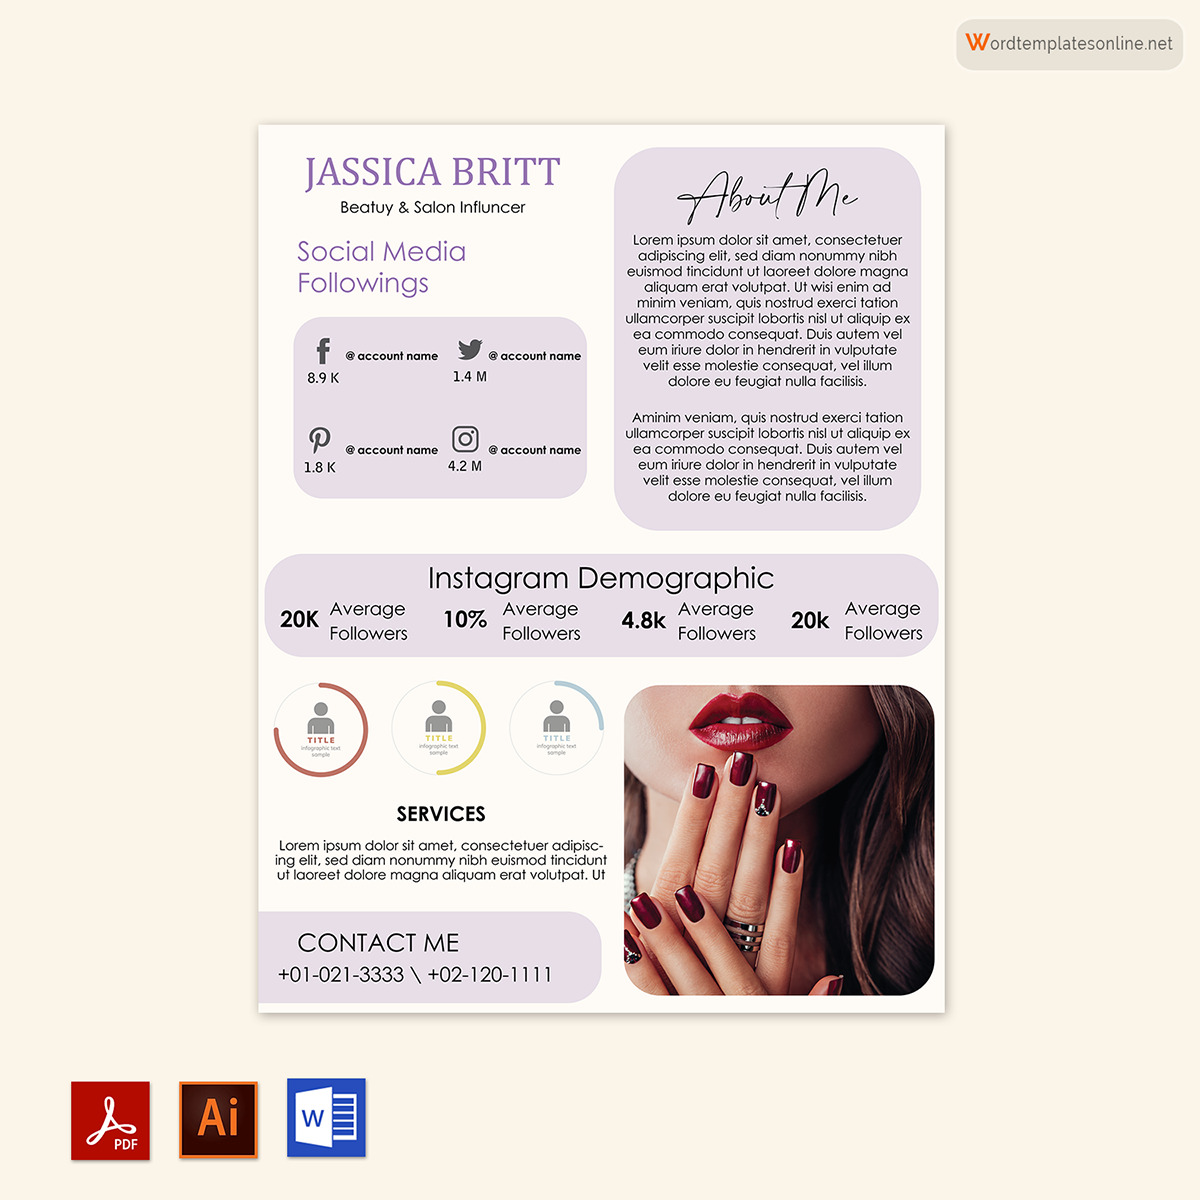 Great Downloadable Beauty and Salon Influencer Media Kit Template for Word and Adobe Format